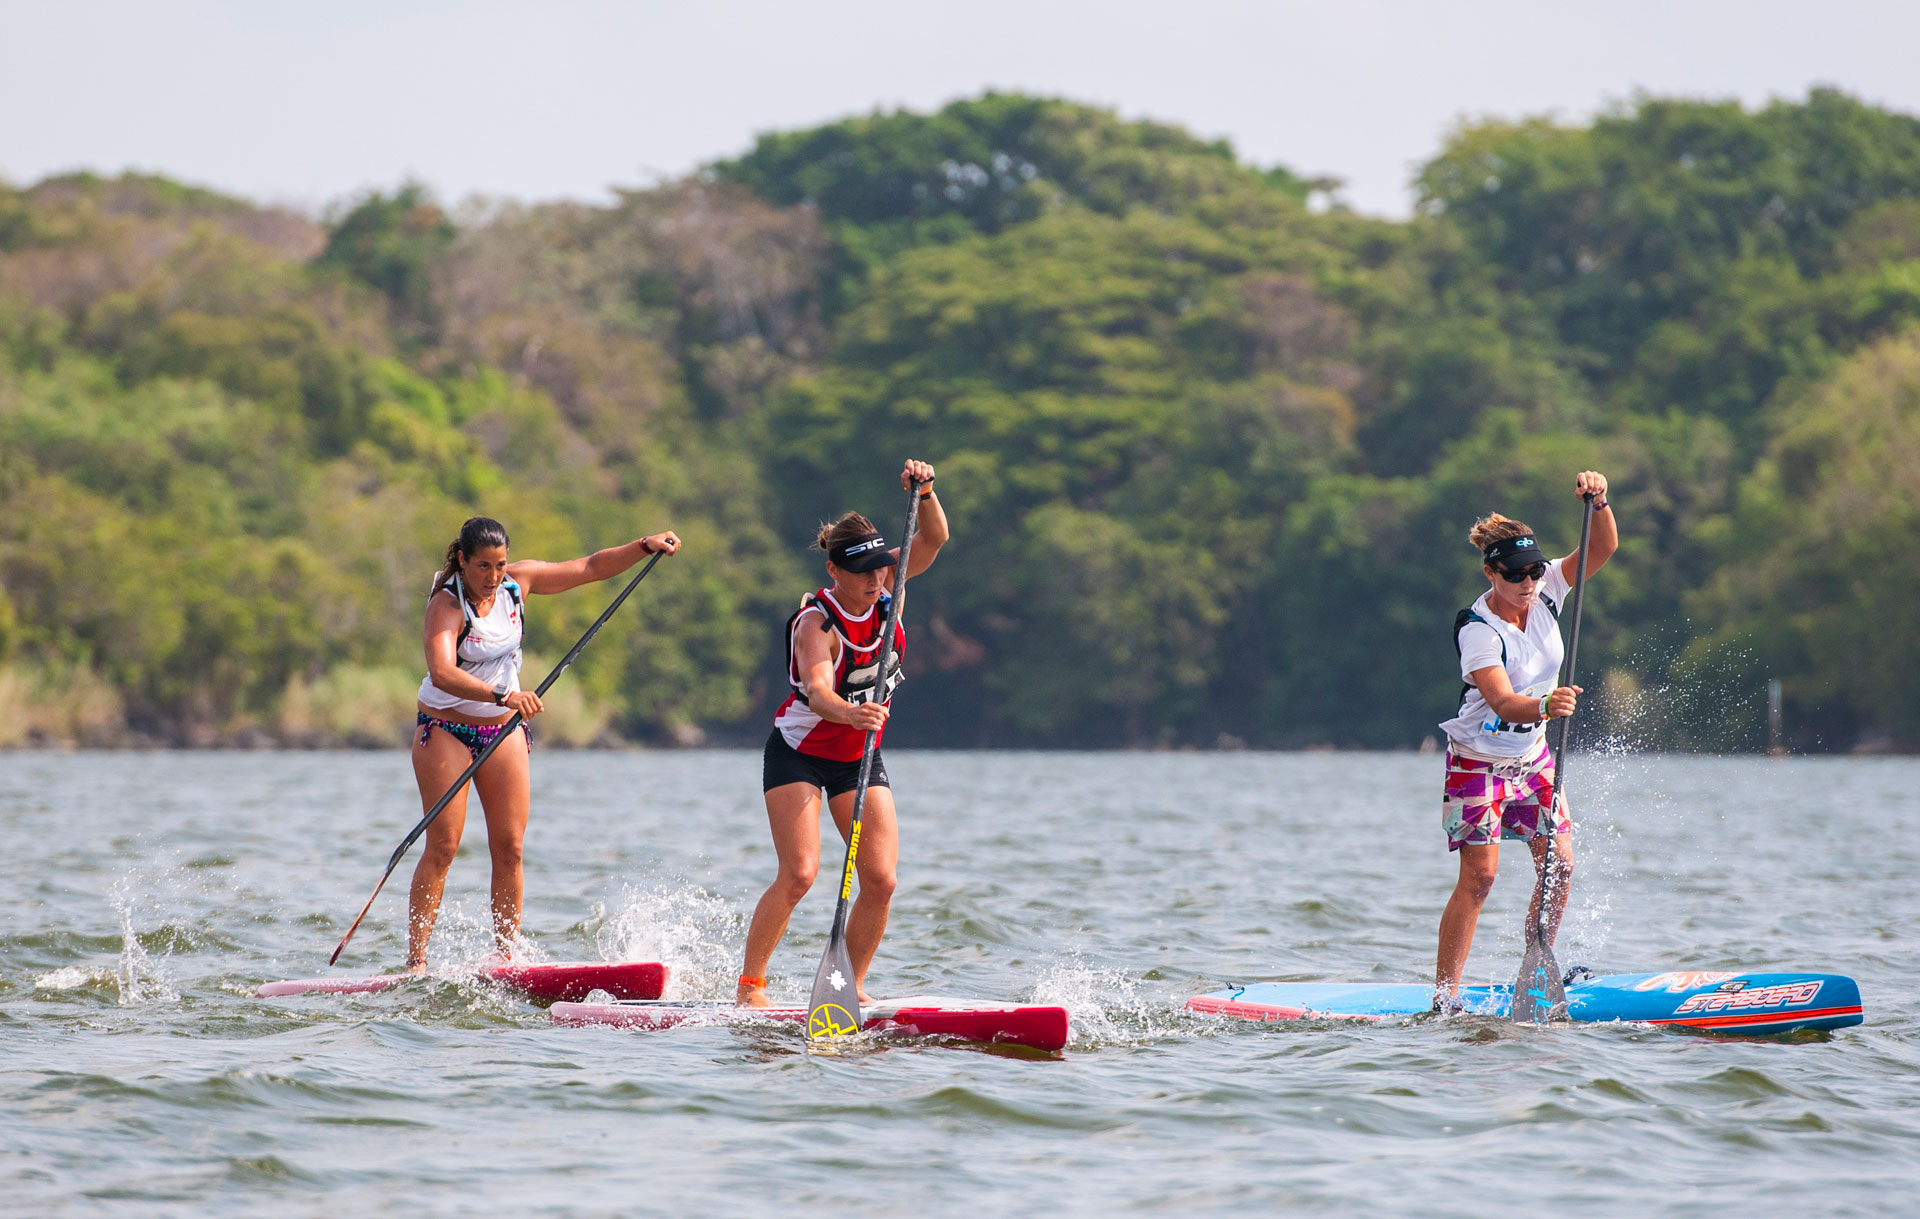 ISA PROMOTES GENDER EQUALITY FOR UPCOMING 2017 ISA WORLD STANDUP PADDLE AND PADDLEBOARD CHAMPIONSHIP IN DENMARK